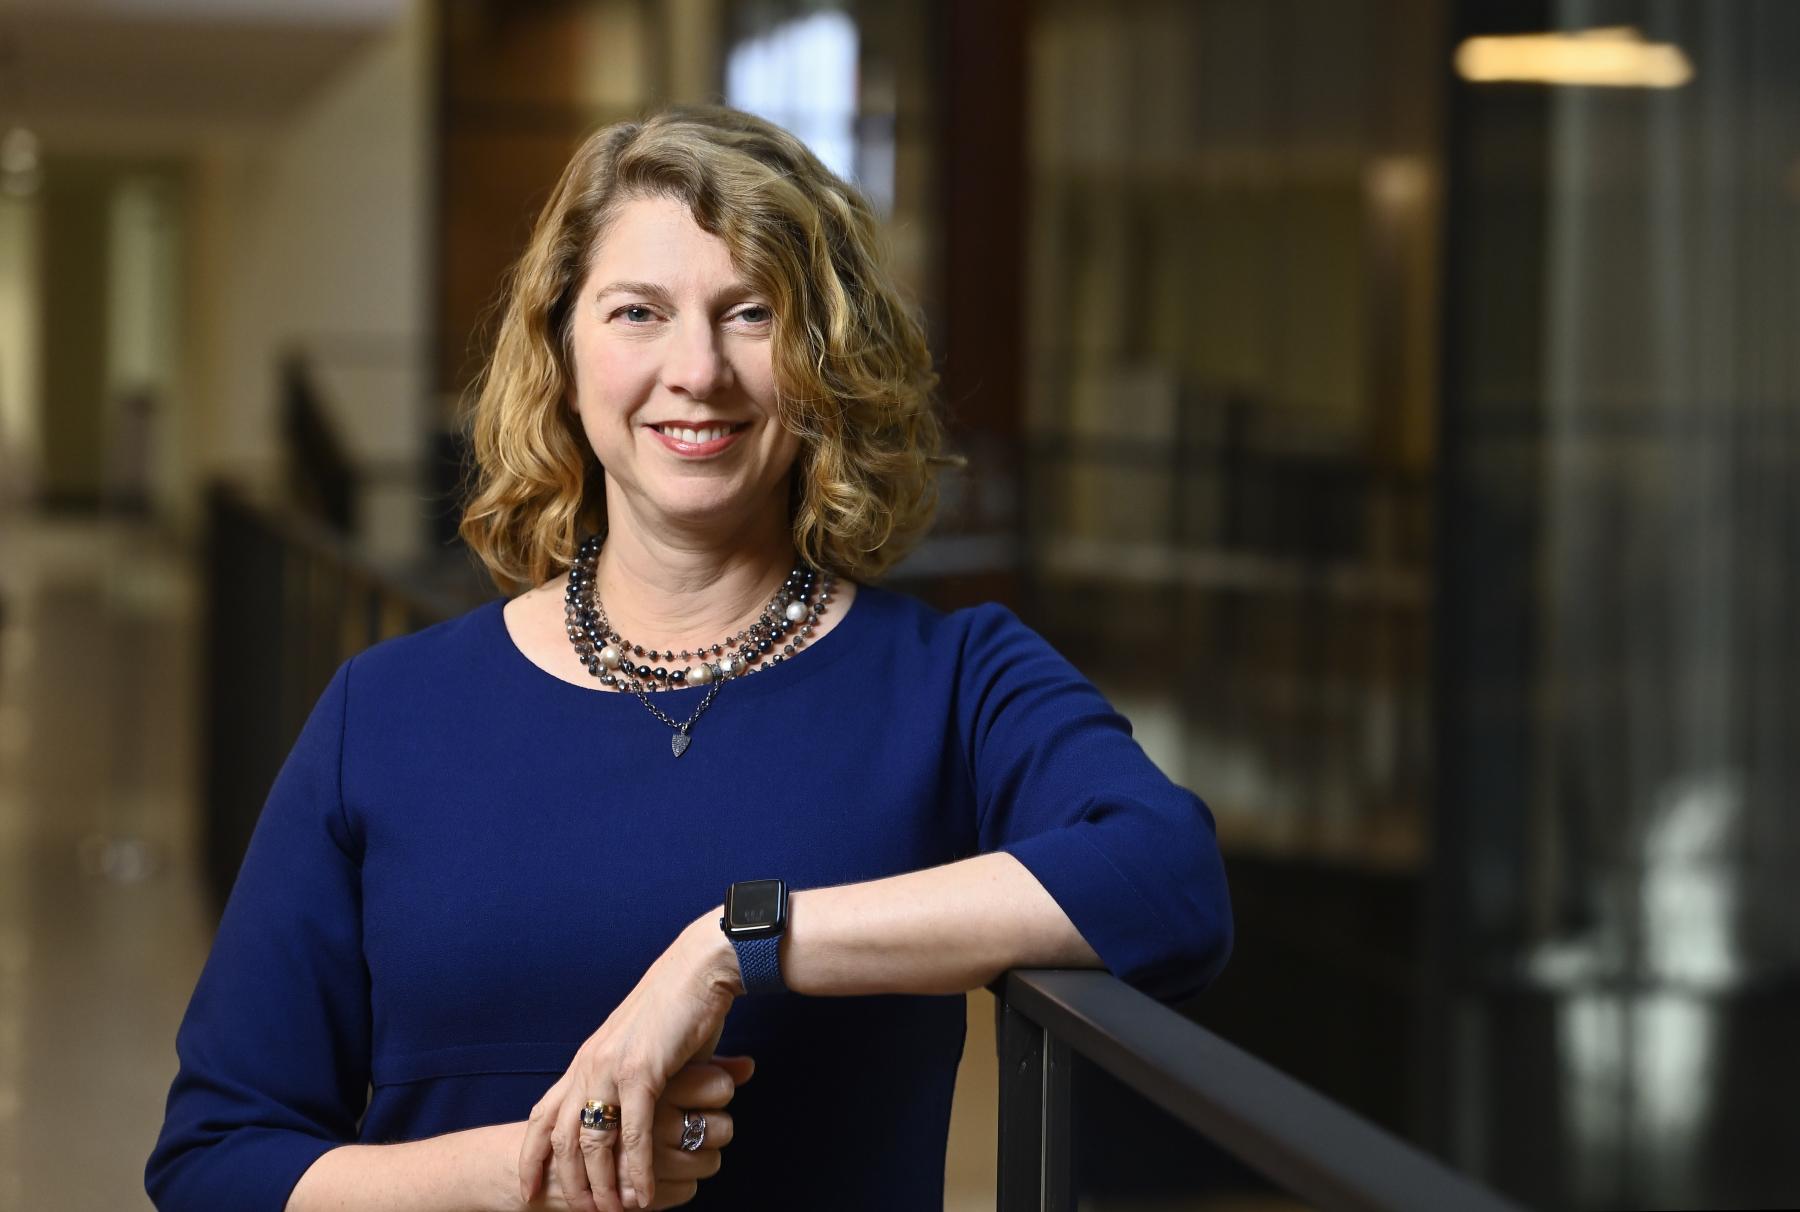 Leading health policy researcher Melinda Buntin joins Johns Hopkins